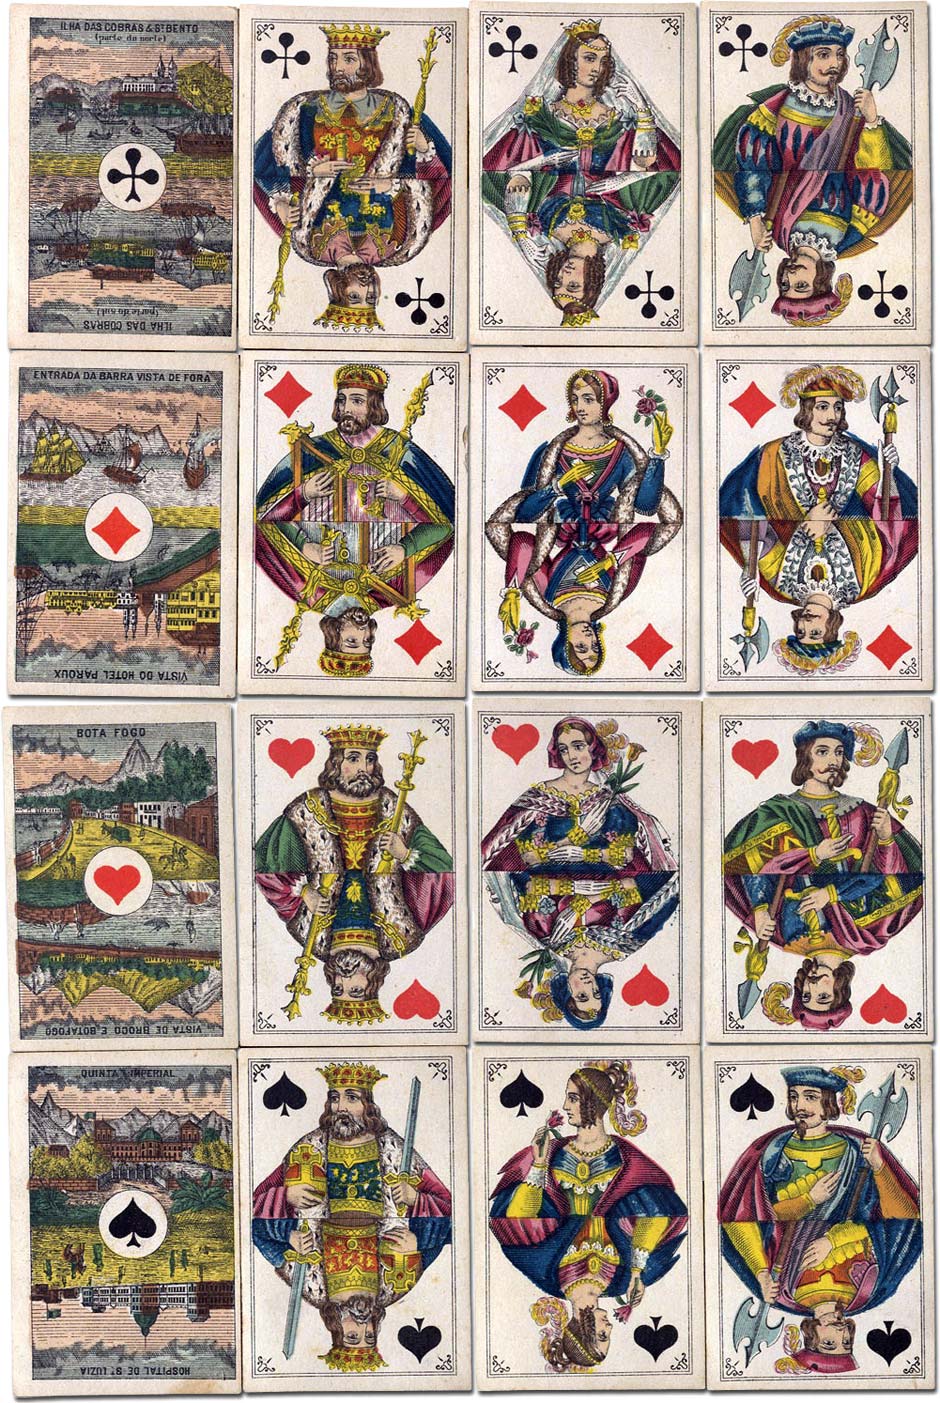 Bongoût pattern playing cards with special scenic Aces for Brazil manufactured by A. Van Genechten, 1870